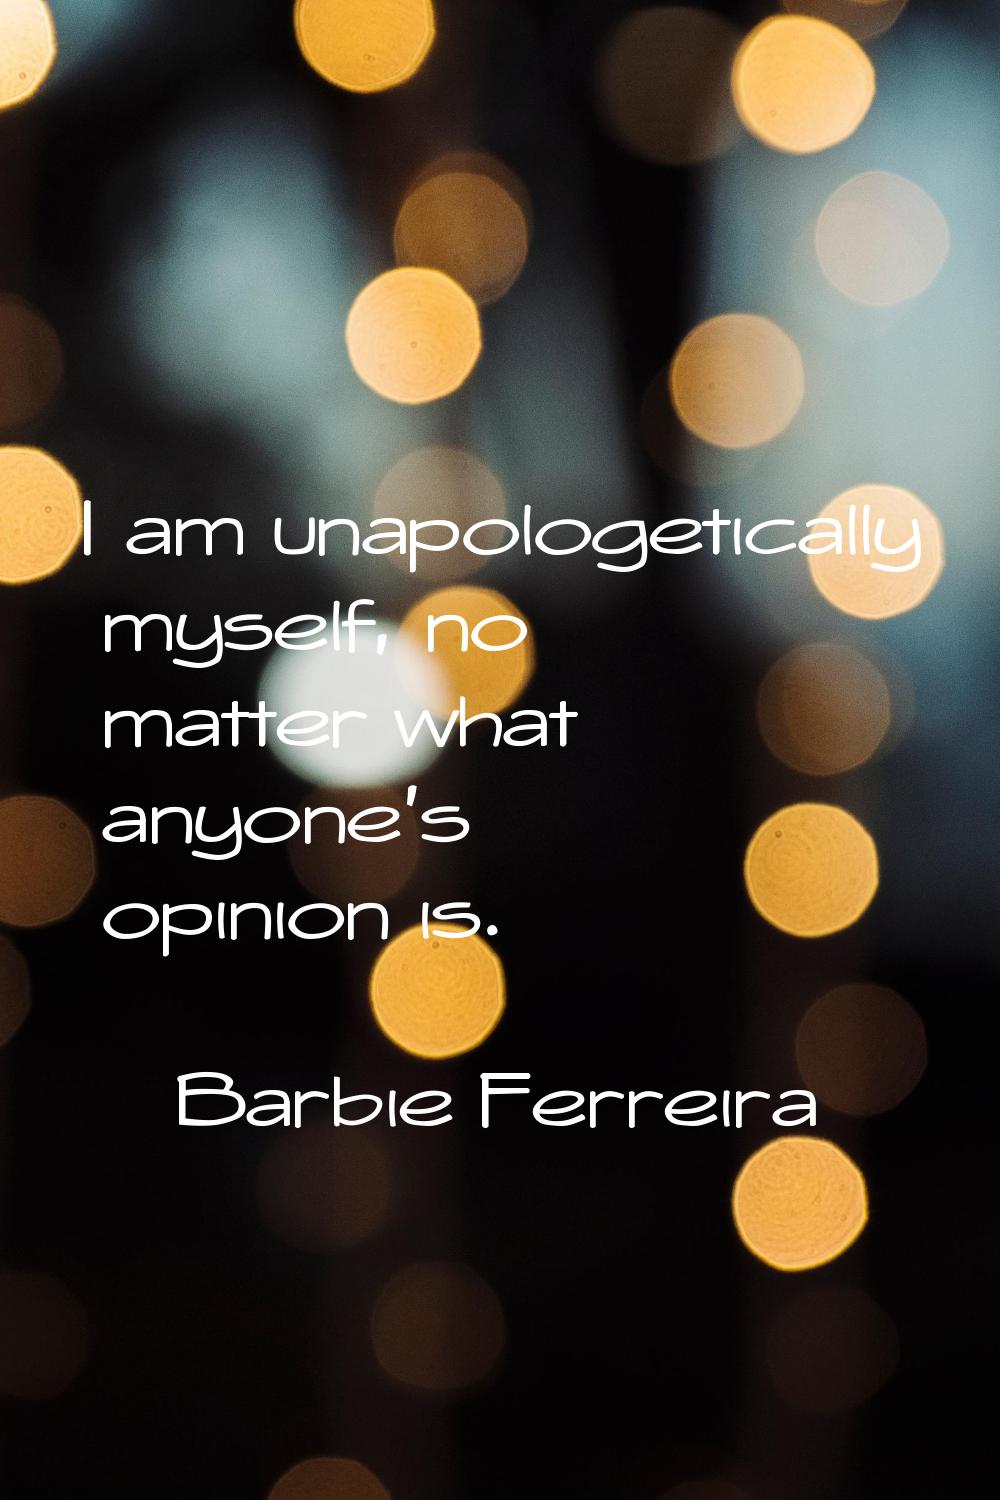 I am unapologetically myself, no matter what anyone's opinion is.